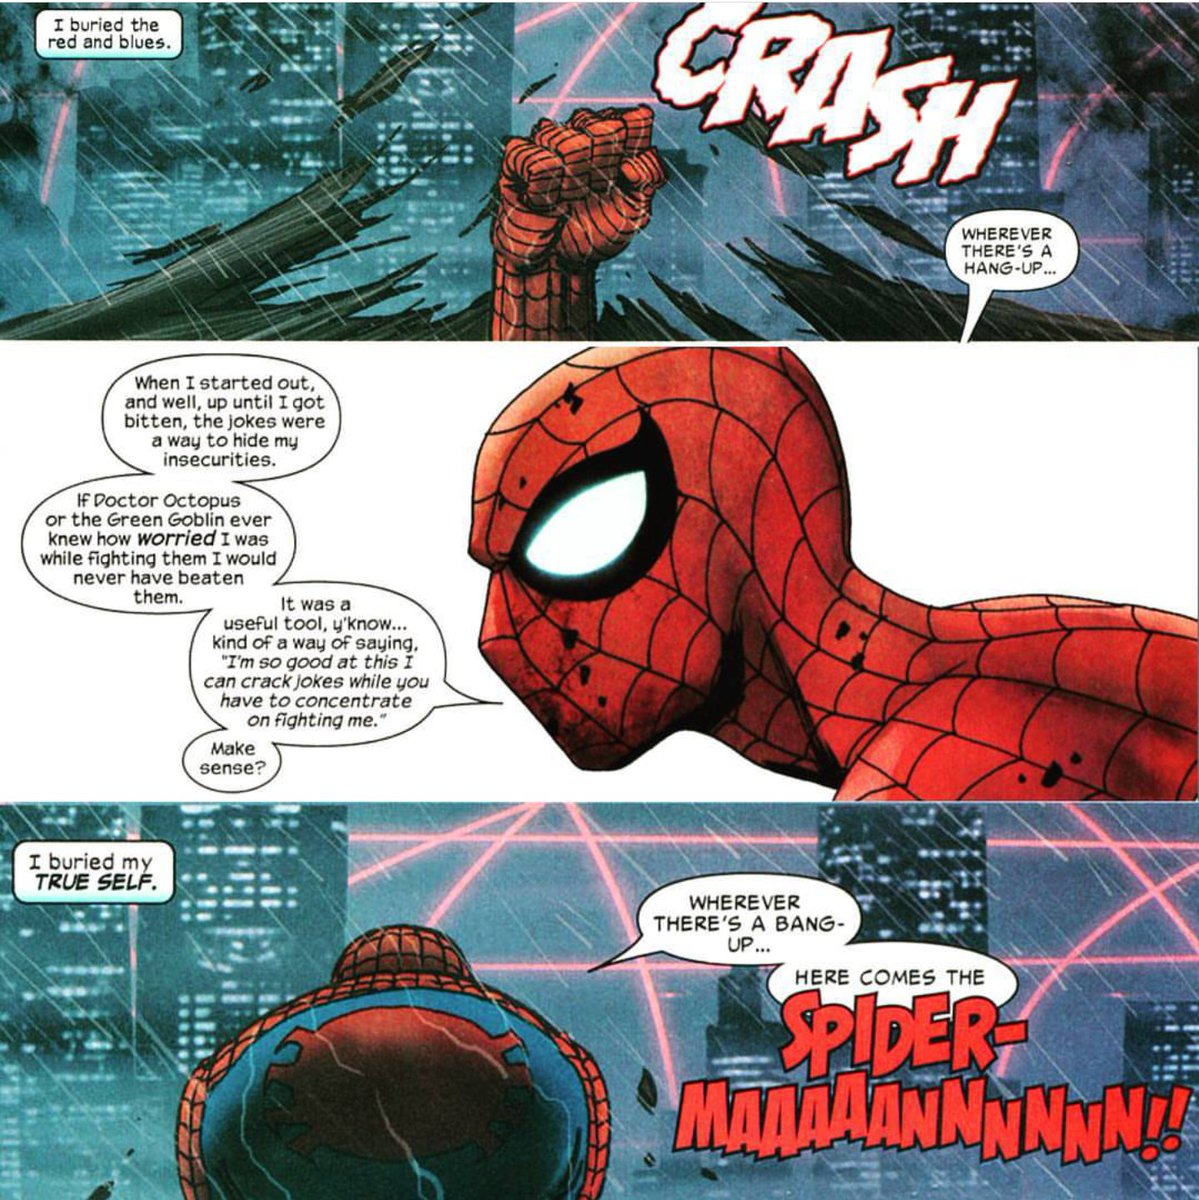 Combined the illest Spider-Man quote with his comeback from Spider-Man: Reign. This is the root of Spider-Man Peter Parker. The hardest shit possible. The best of the damn best.